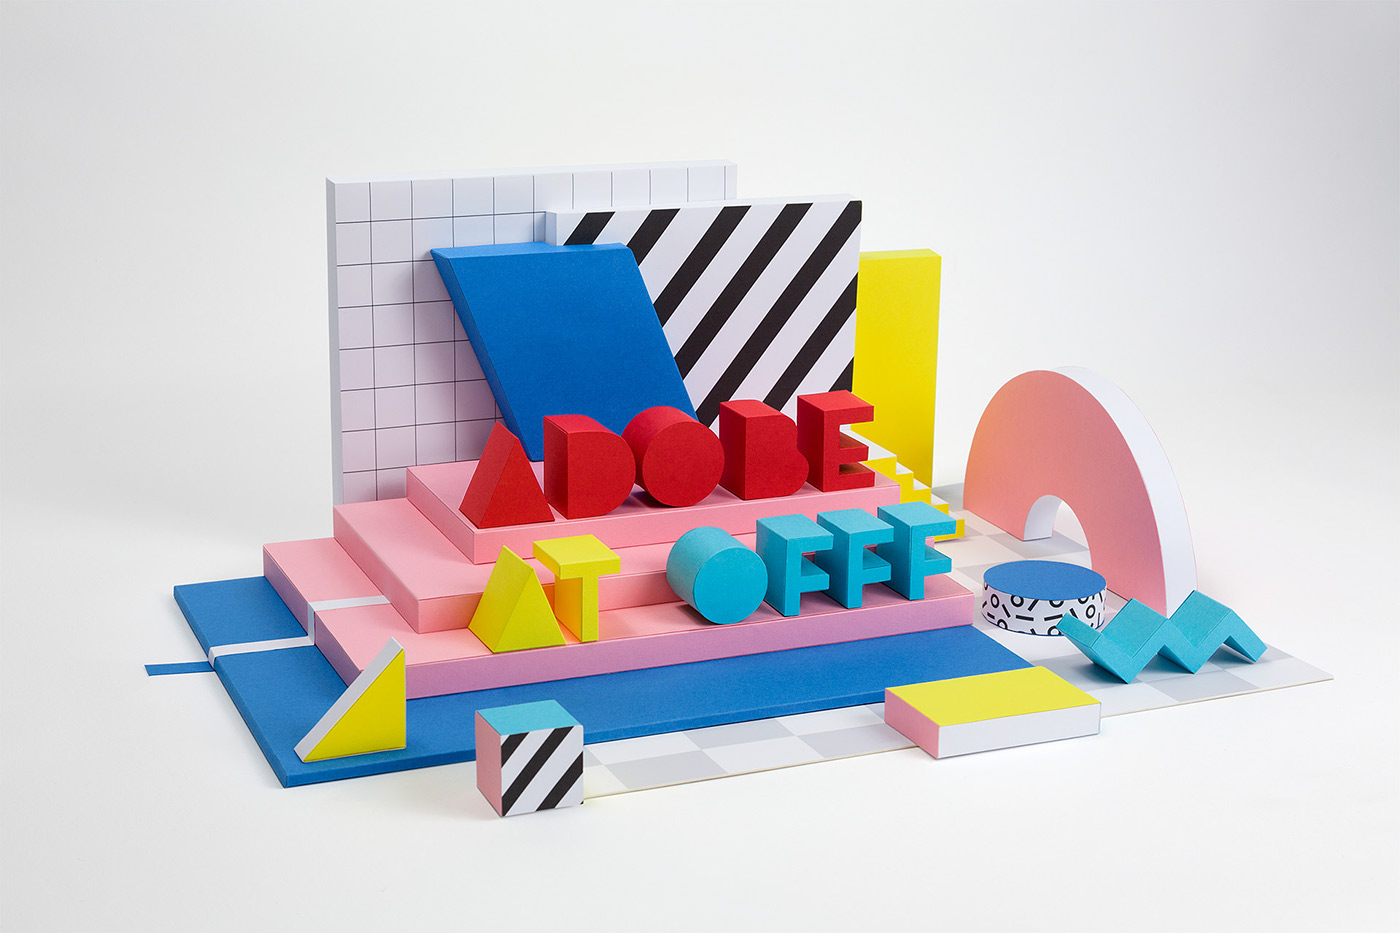 branding  adobe OFFF adobe at offf campaign memphis style Stand stand design papercraft set design 